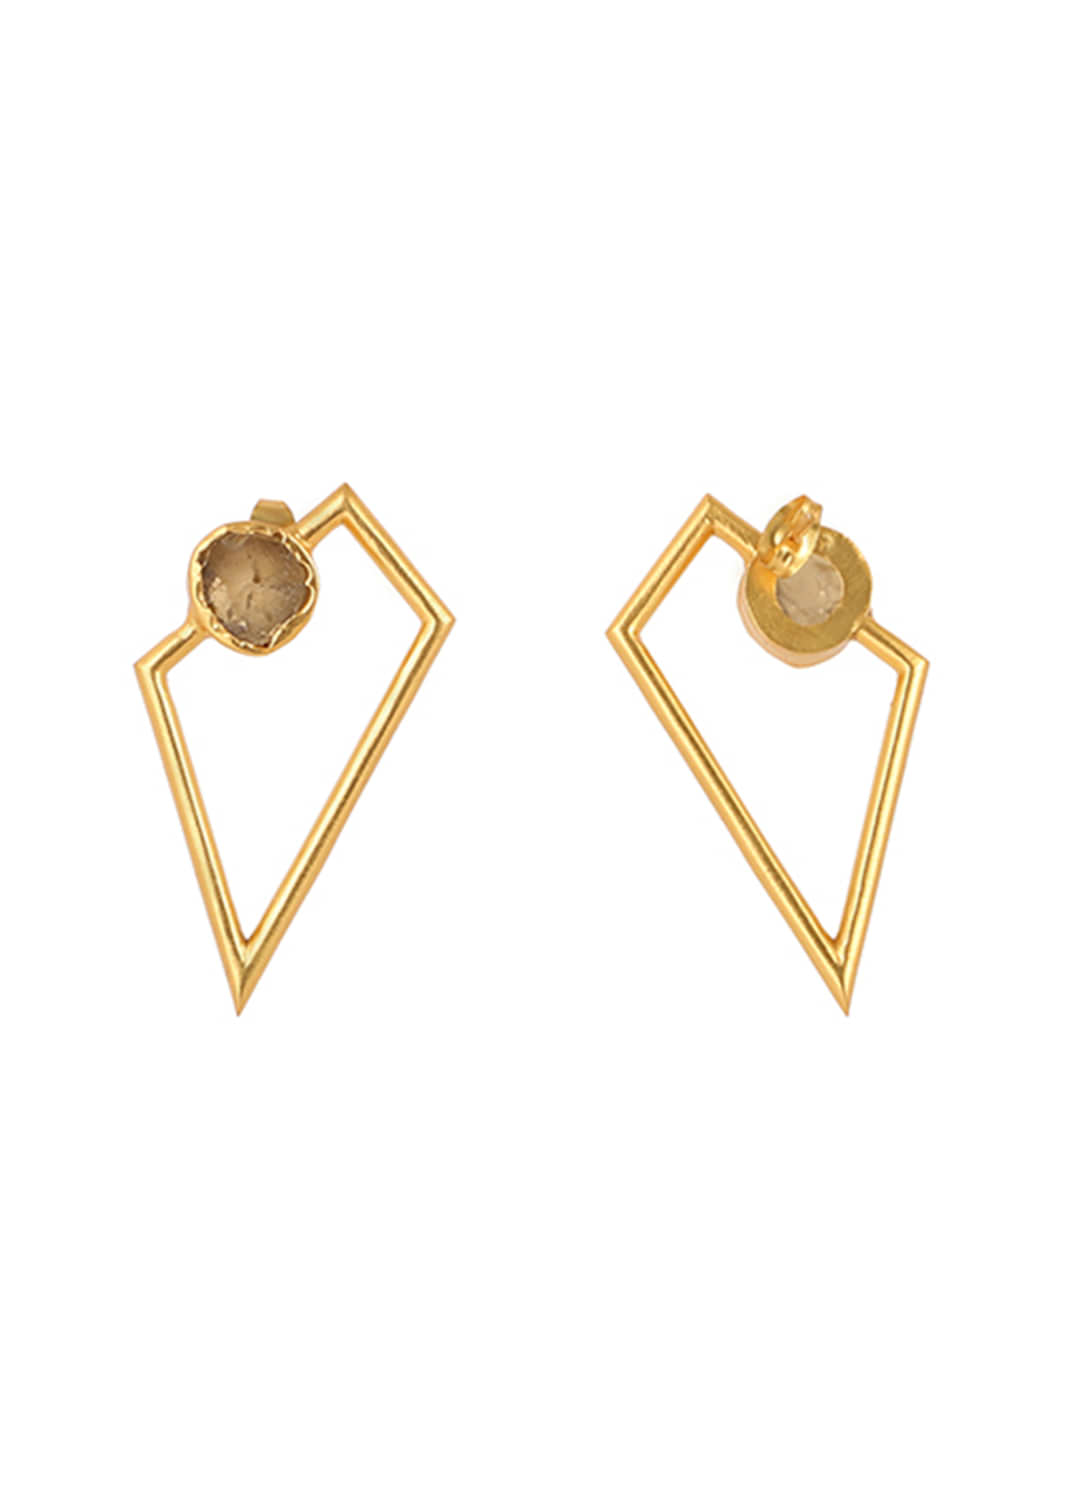 Gold Plated Earrings In A Geometric Design With Uncut Citrine Highlight By Zariin